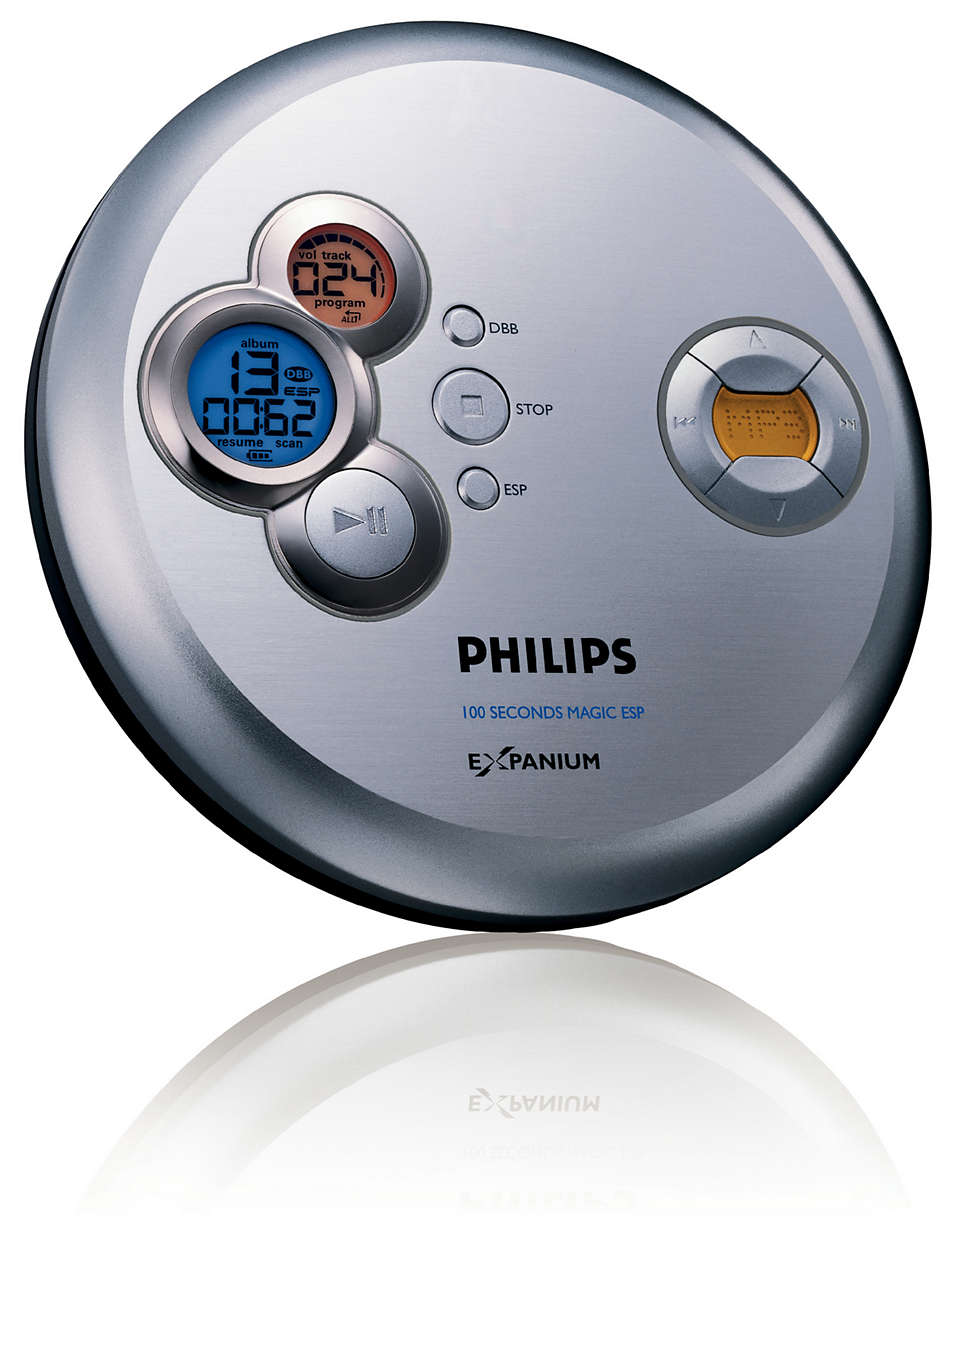 Portable MP3-CD Player EXP2460/02 | Philips
